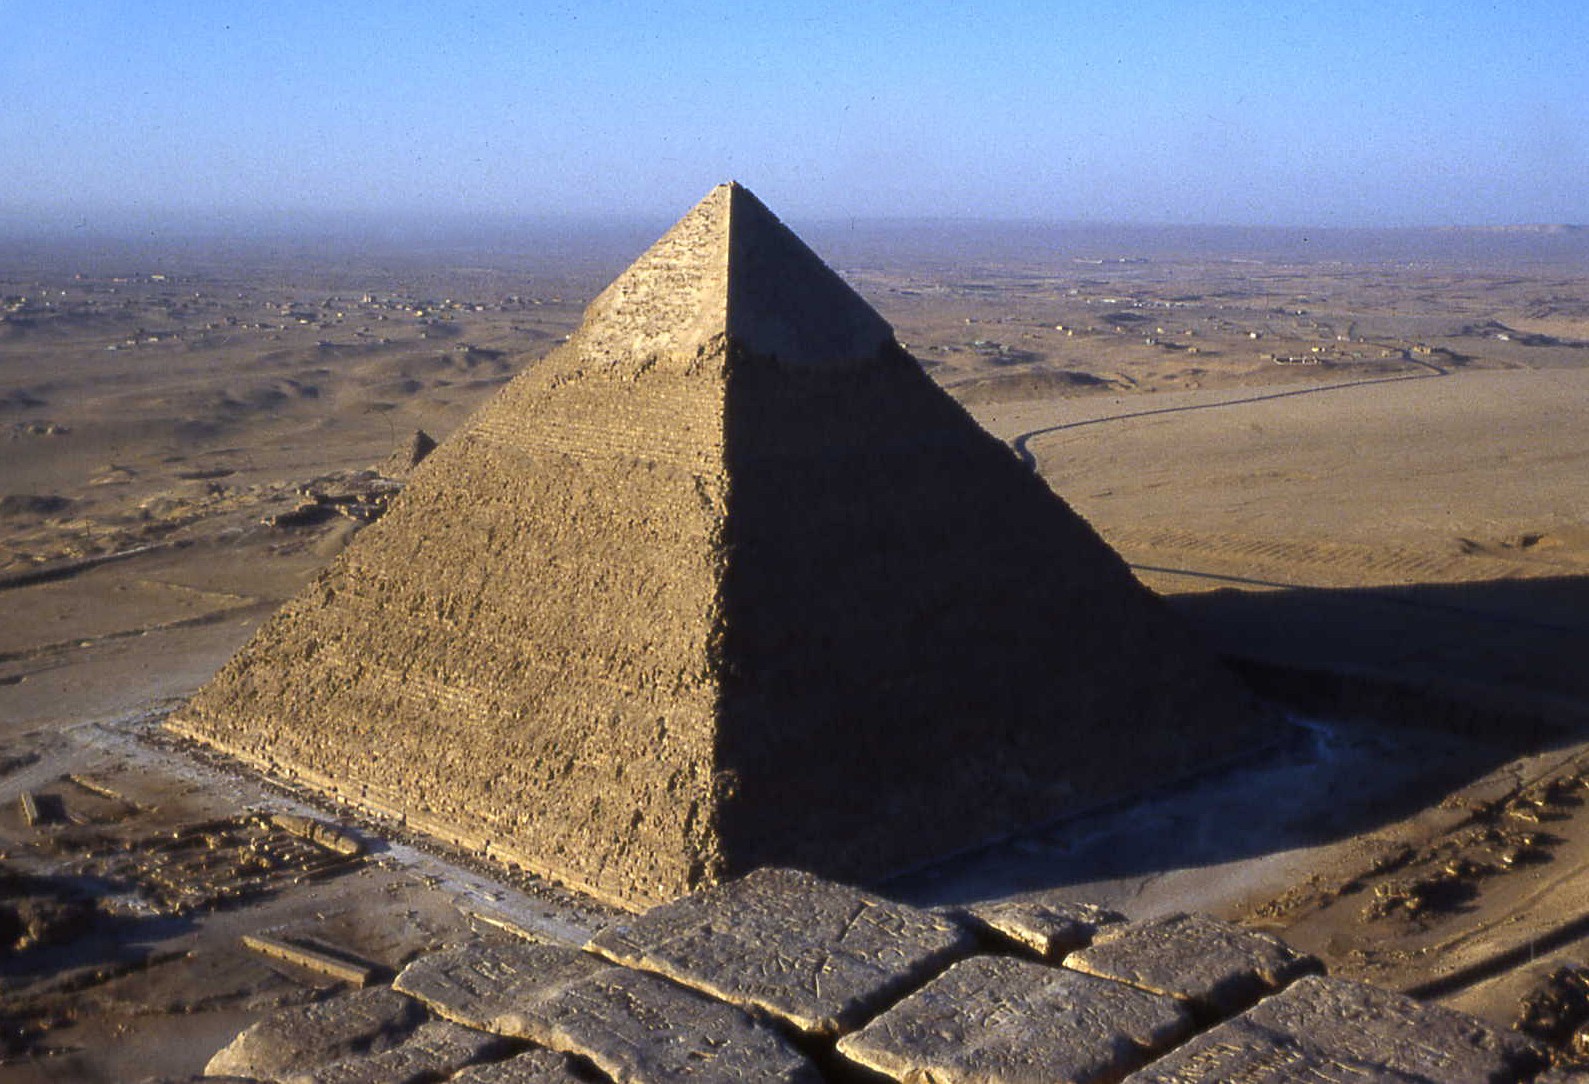 Giza, Egypt: looking southwest from the top of the Great Pyramid of Cheops/Khufu, now 455 feet high, toward that of his son Khafre. The Great Pyramid was the tallest structure in the world for nearly 4,000 years. - PHOTO BY BARRY EVANS